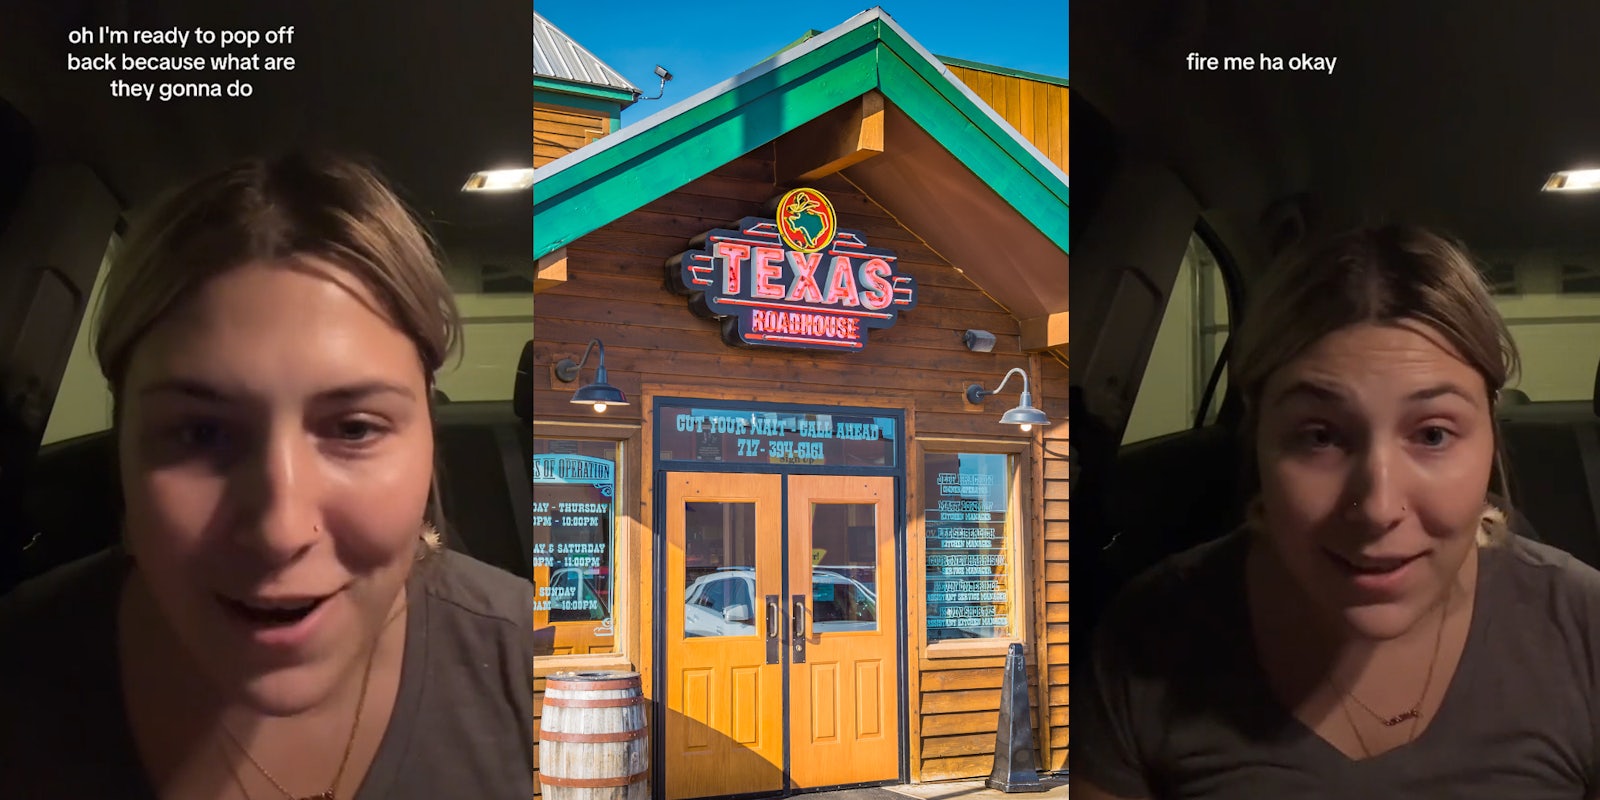 former Texas Roadhouse server speaking in car with caption 'oh I'm ready to pop off back because what are they gonna do' (l) Texas Roadhouse entrance with sign (c) former Texas Roadhouse server speaking in car with caption 'fire me ha okay' (r)